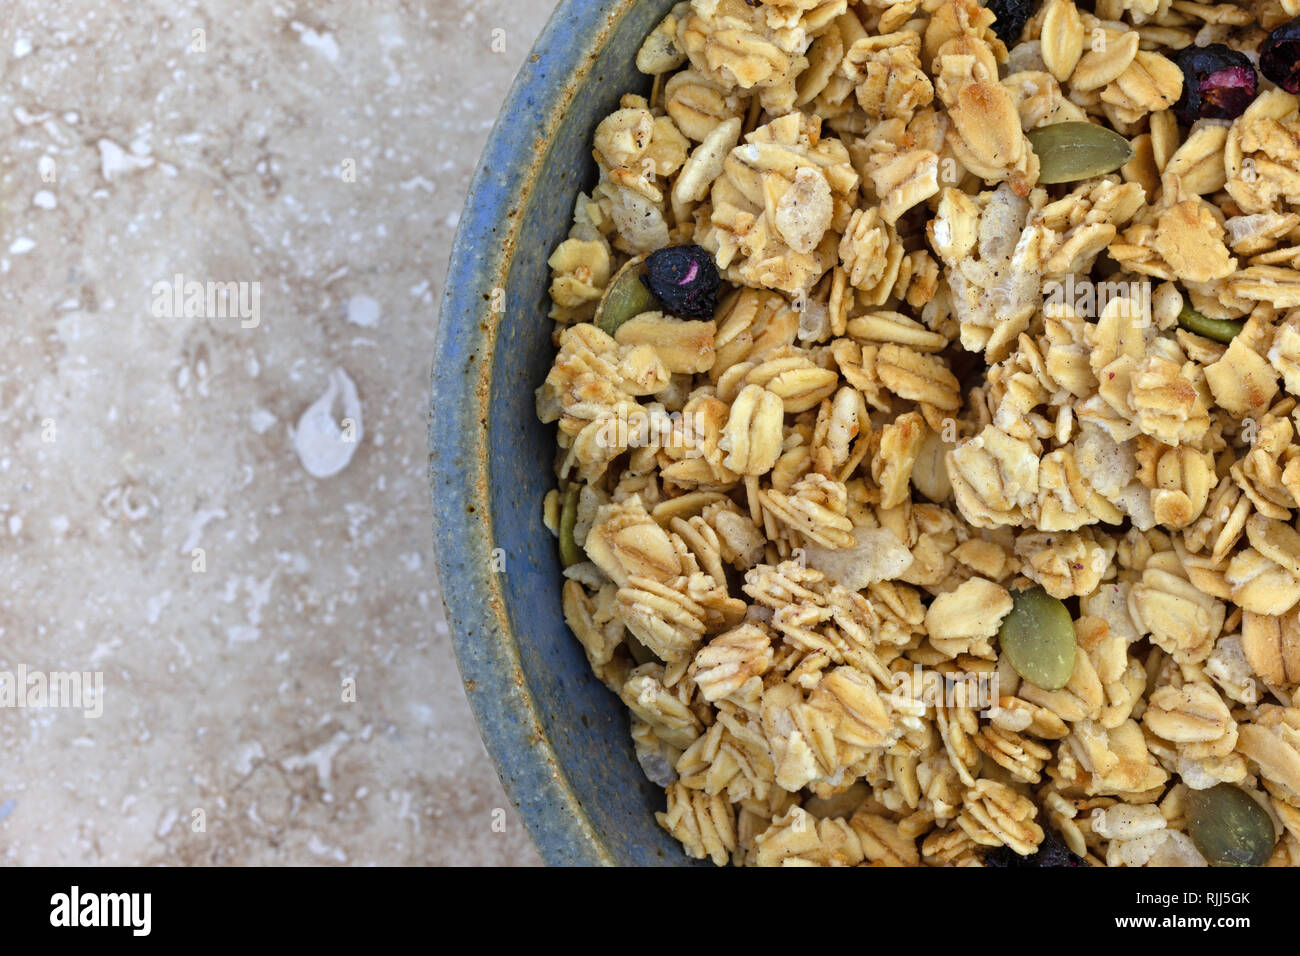 Top close view of a bowl of dry organic breakfast cereal with dried blueberries and pumpkin seeds on a marble table. Stock Photo